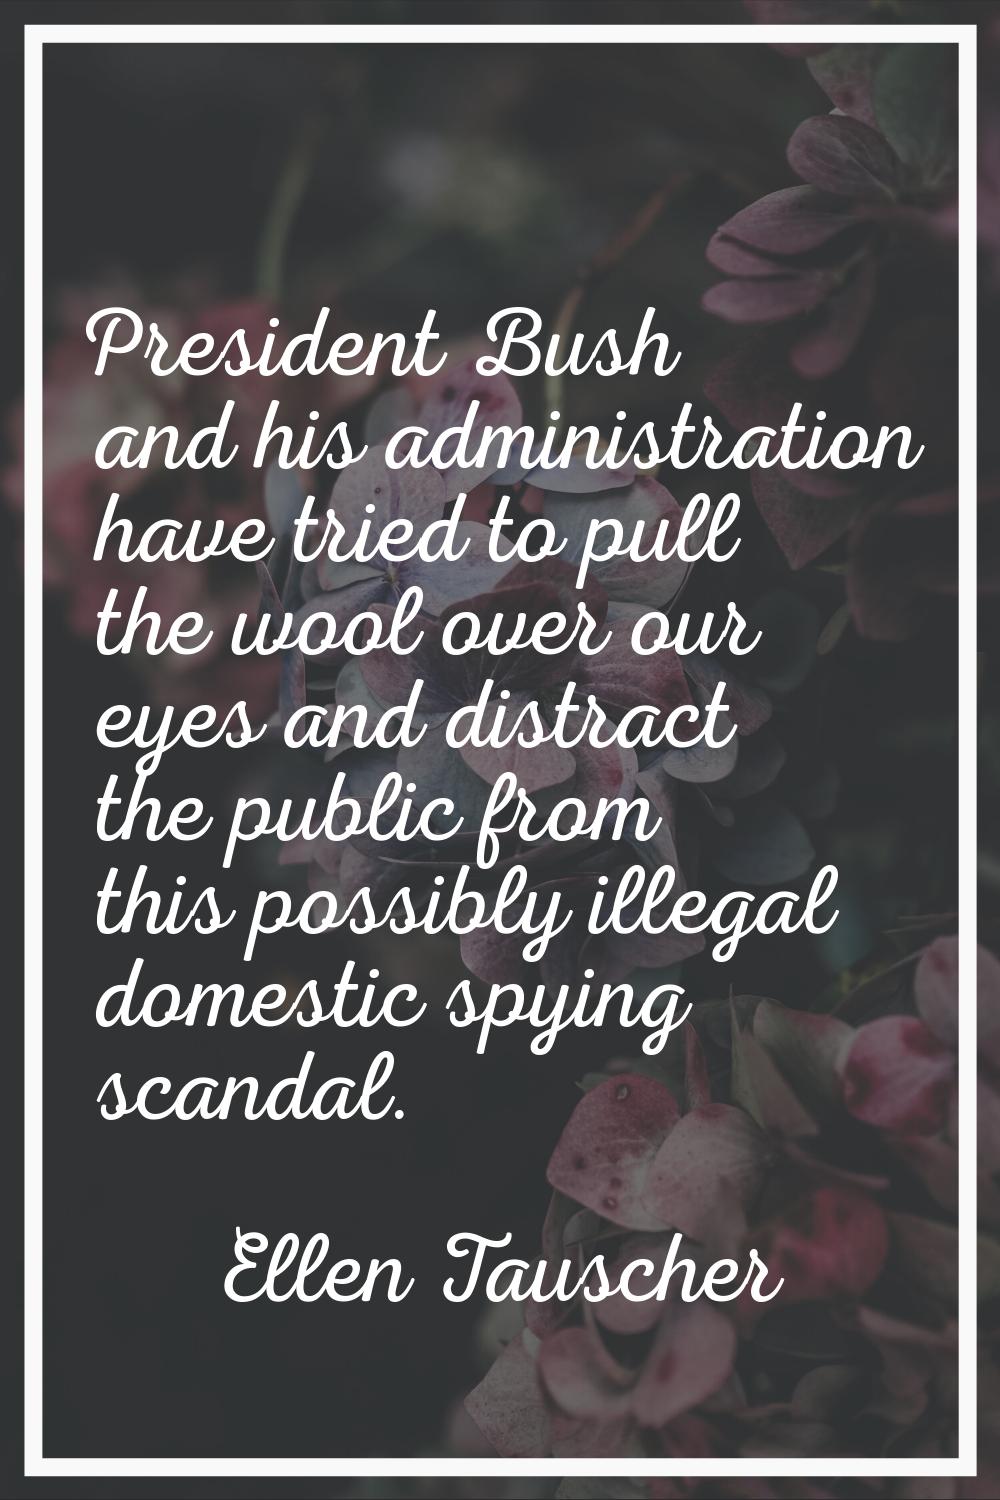 President Bush and his administration have tried to pull the wool over our eyes and distract the pu